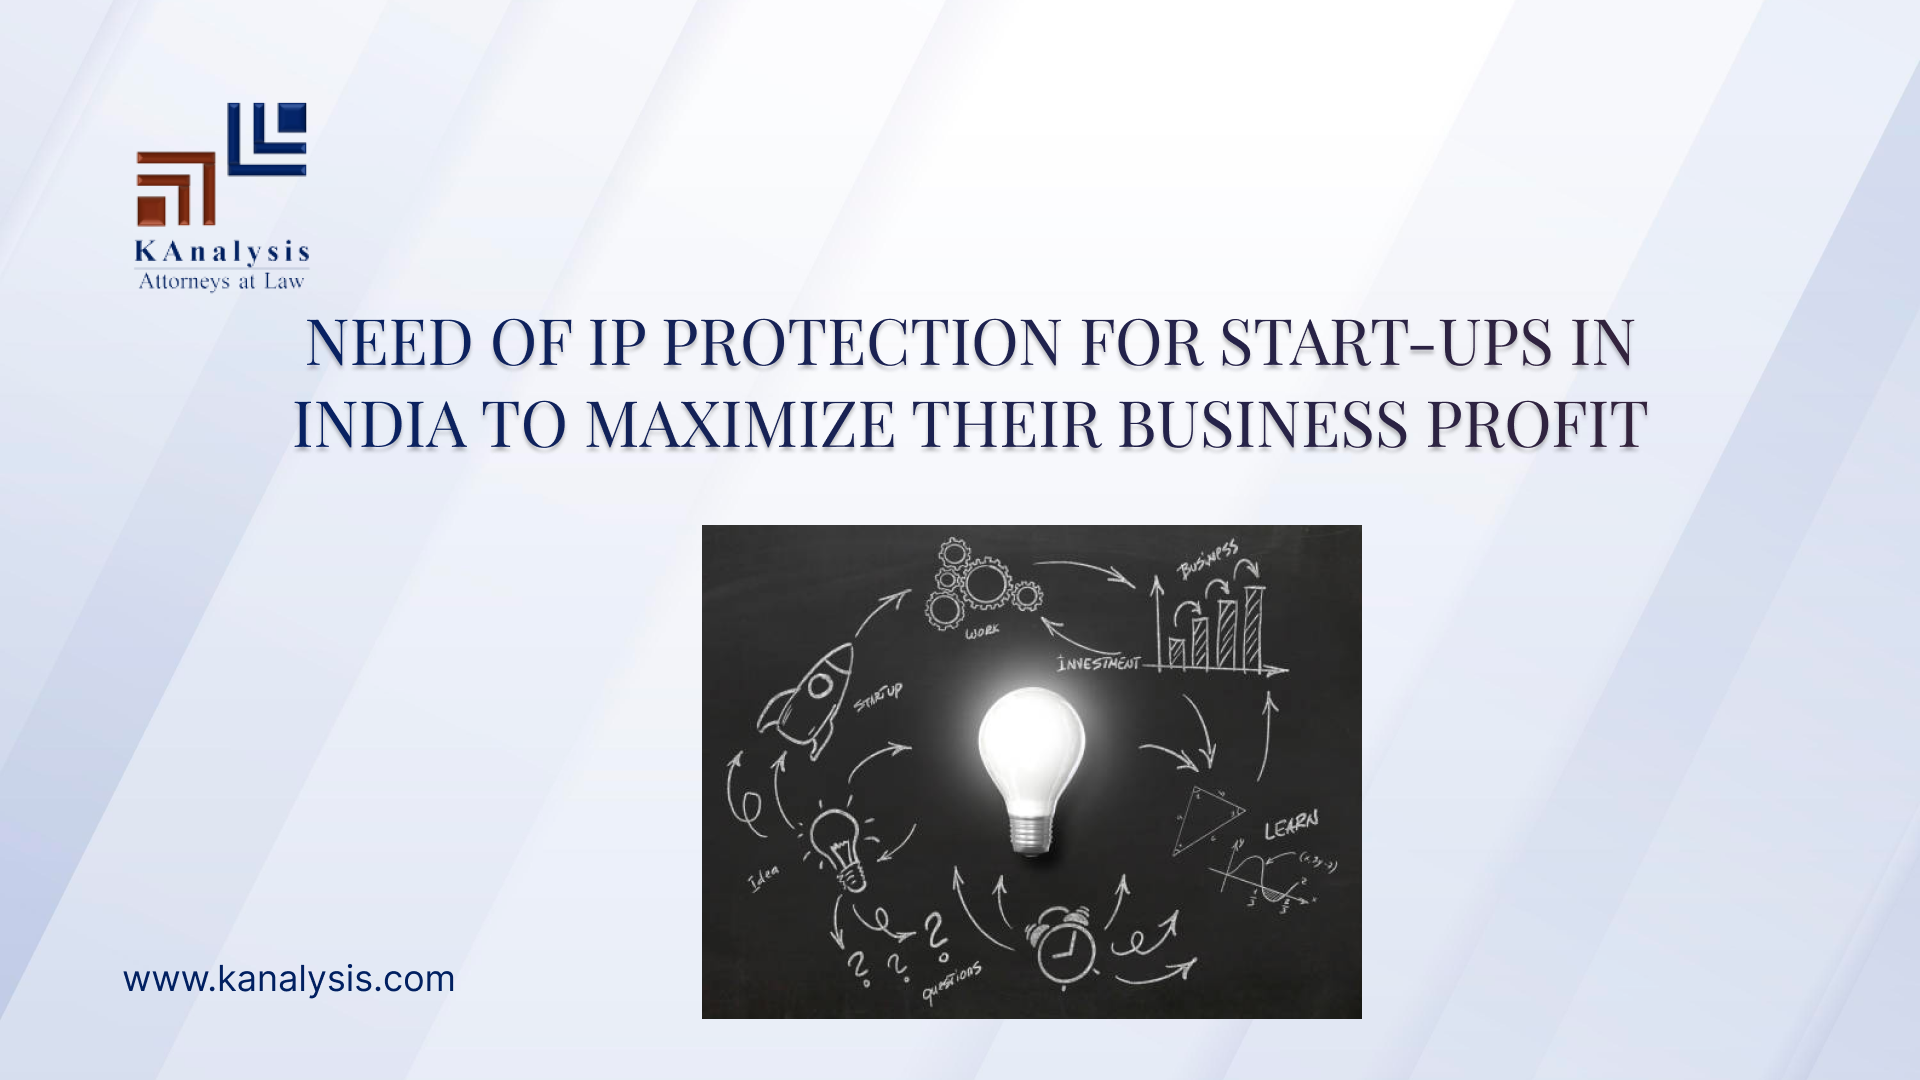 NEED OF IP PROTECTION FOR START-UP’S IN INDIA TO MAXIMIZE THEIR BUSINESS PROFIT